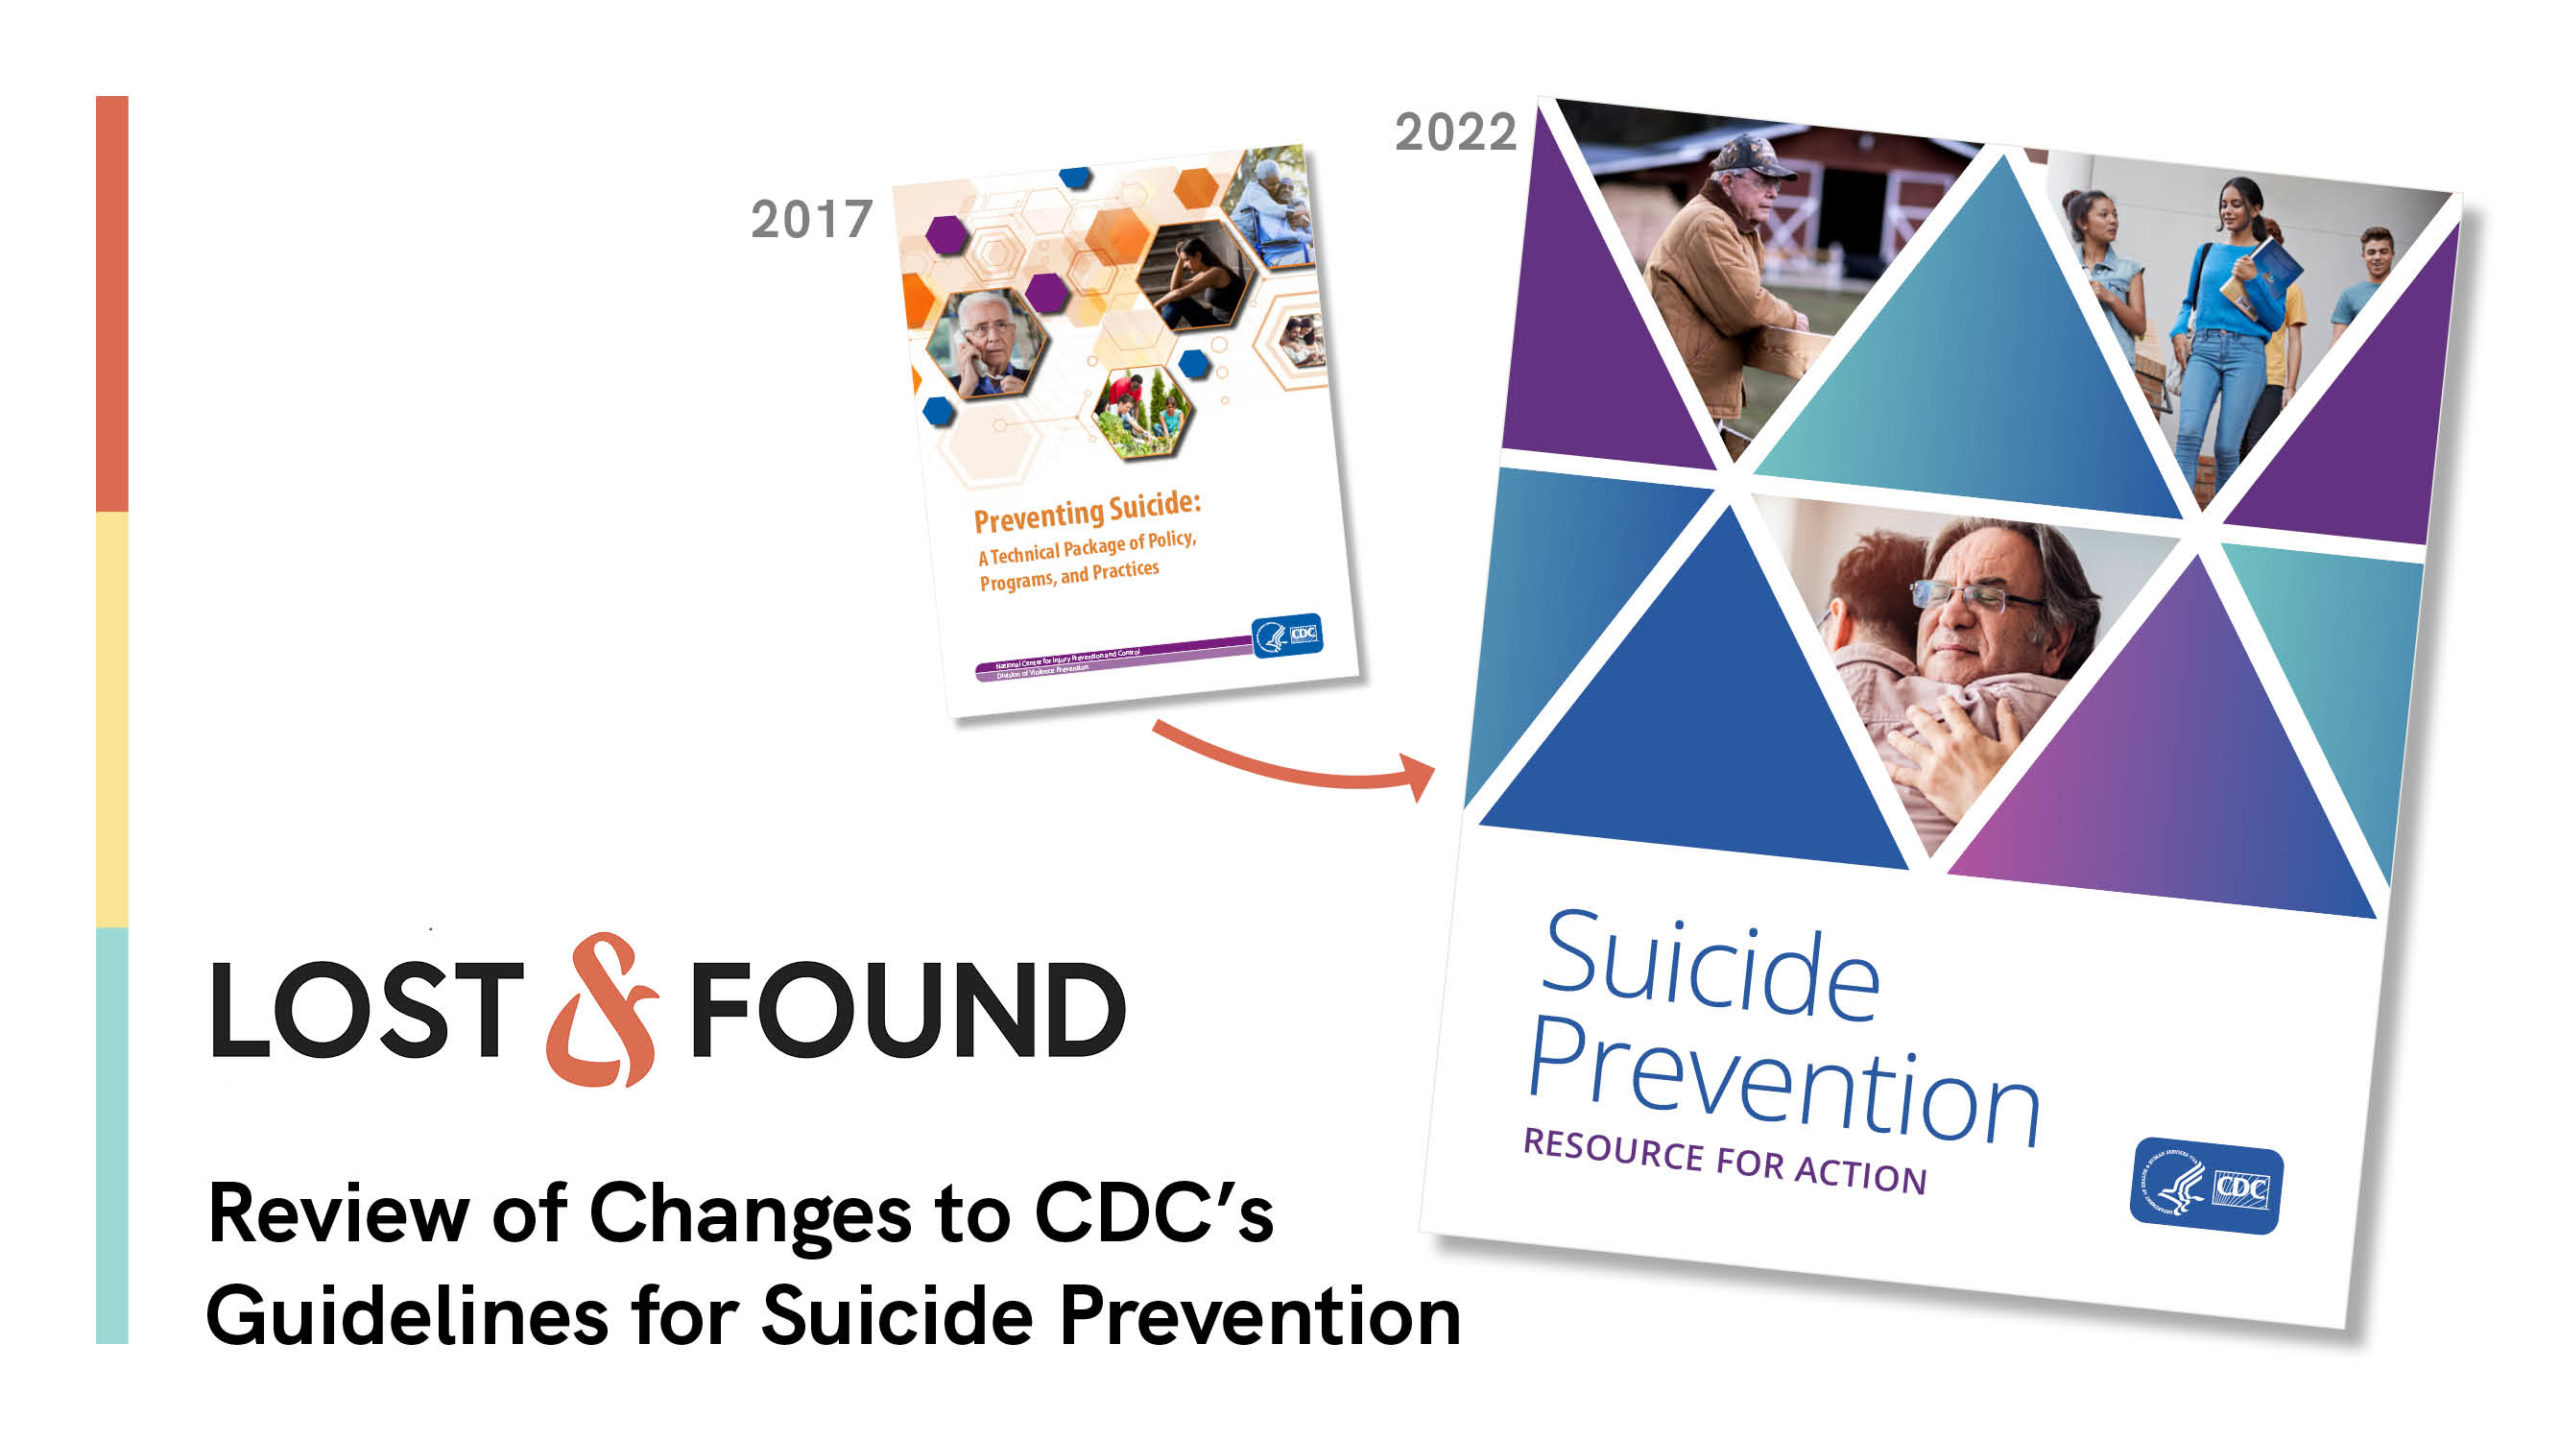 CDC updates its guidance for suicide prevention – graphic showing Suicide Prevention Resource for Action guide